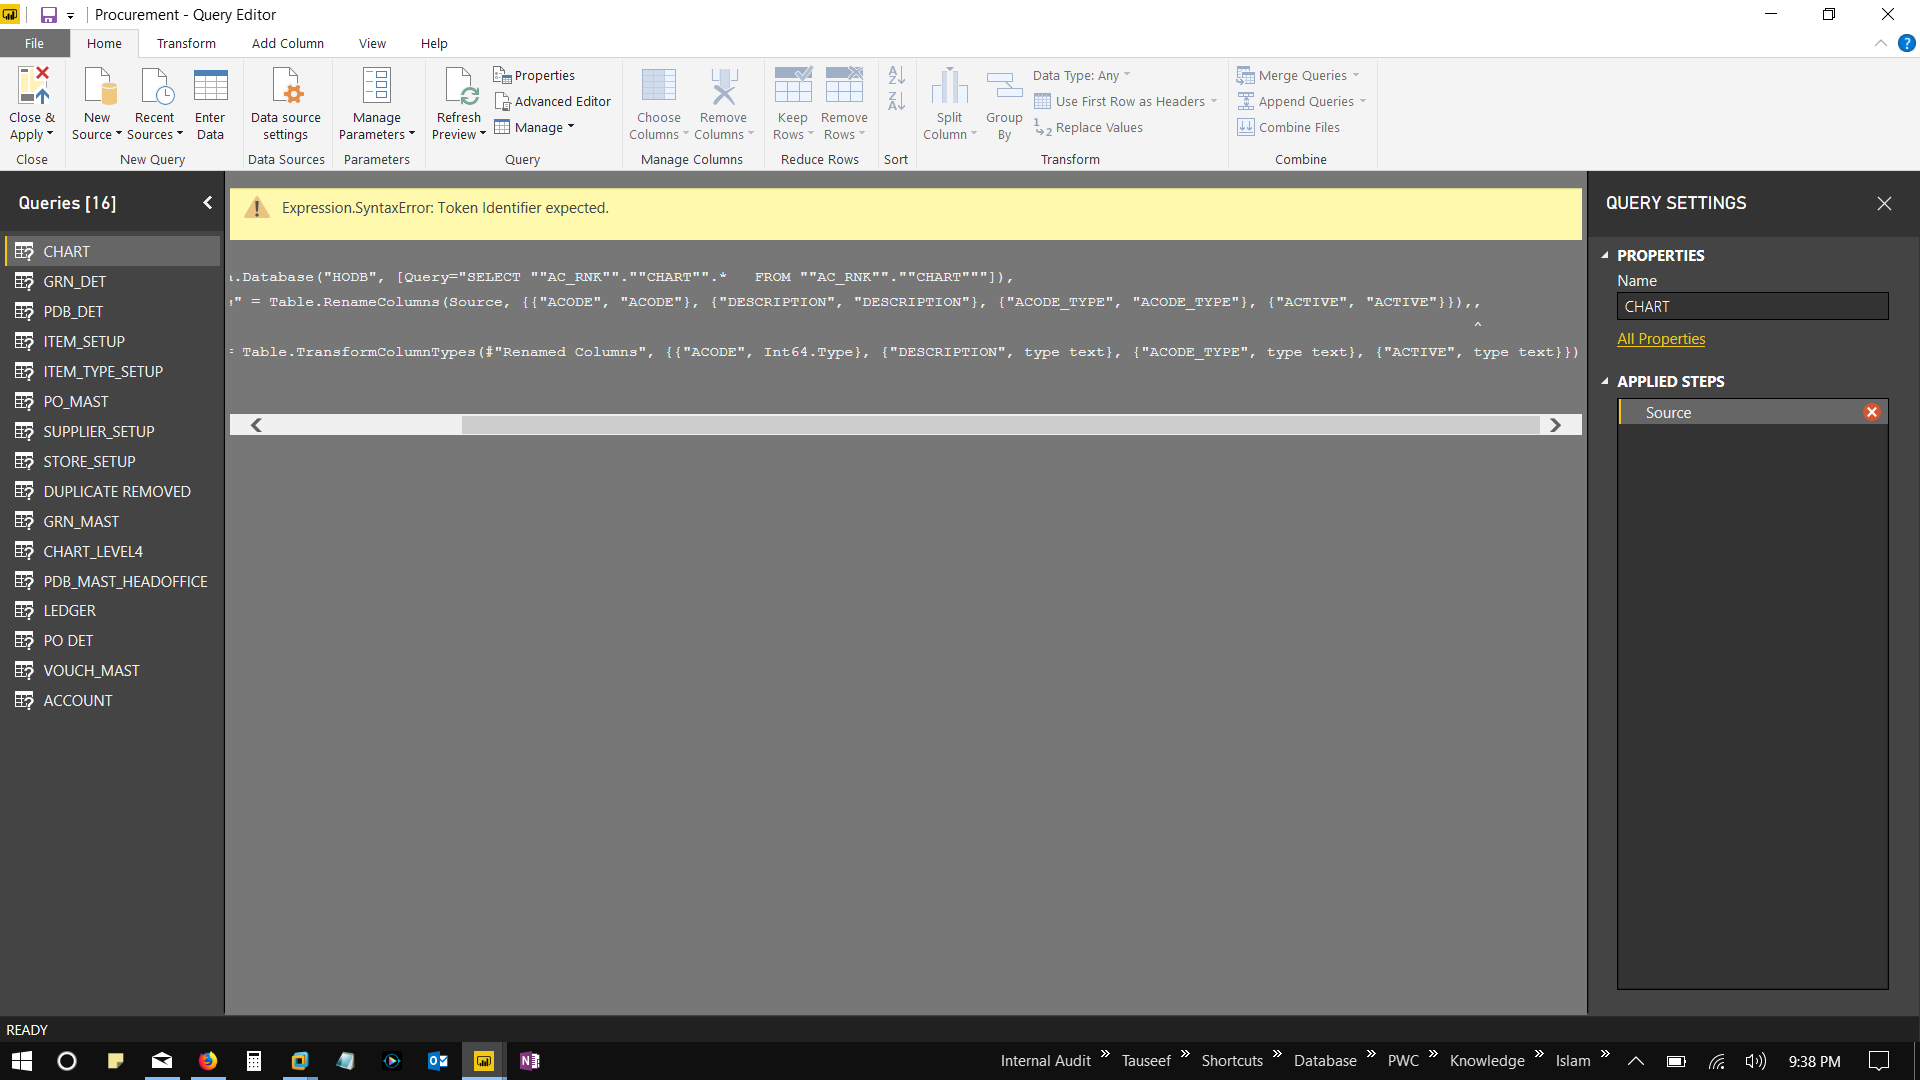 Expected primary. Сертификаты по Power bi. Power bi примеры работ. Query Editor. <Query expression> expected, got '1'.